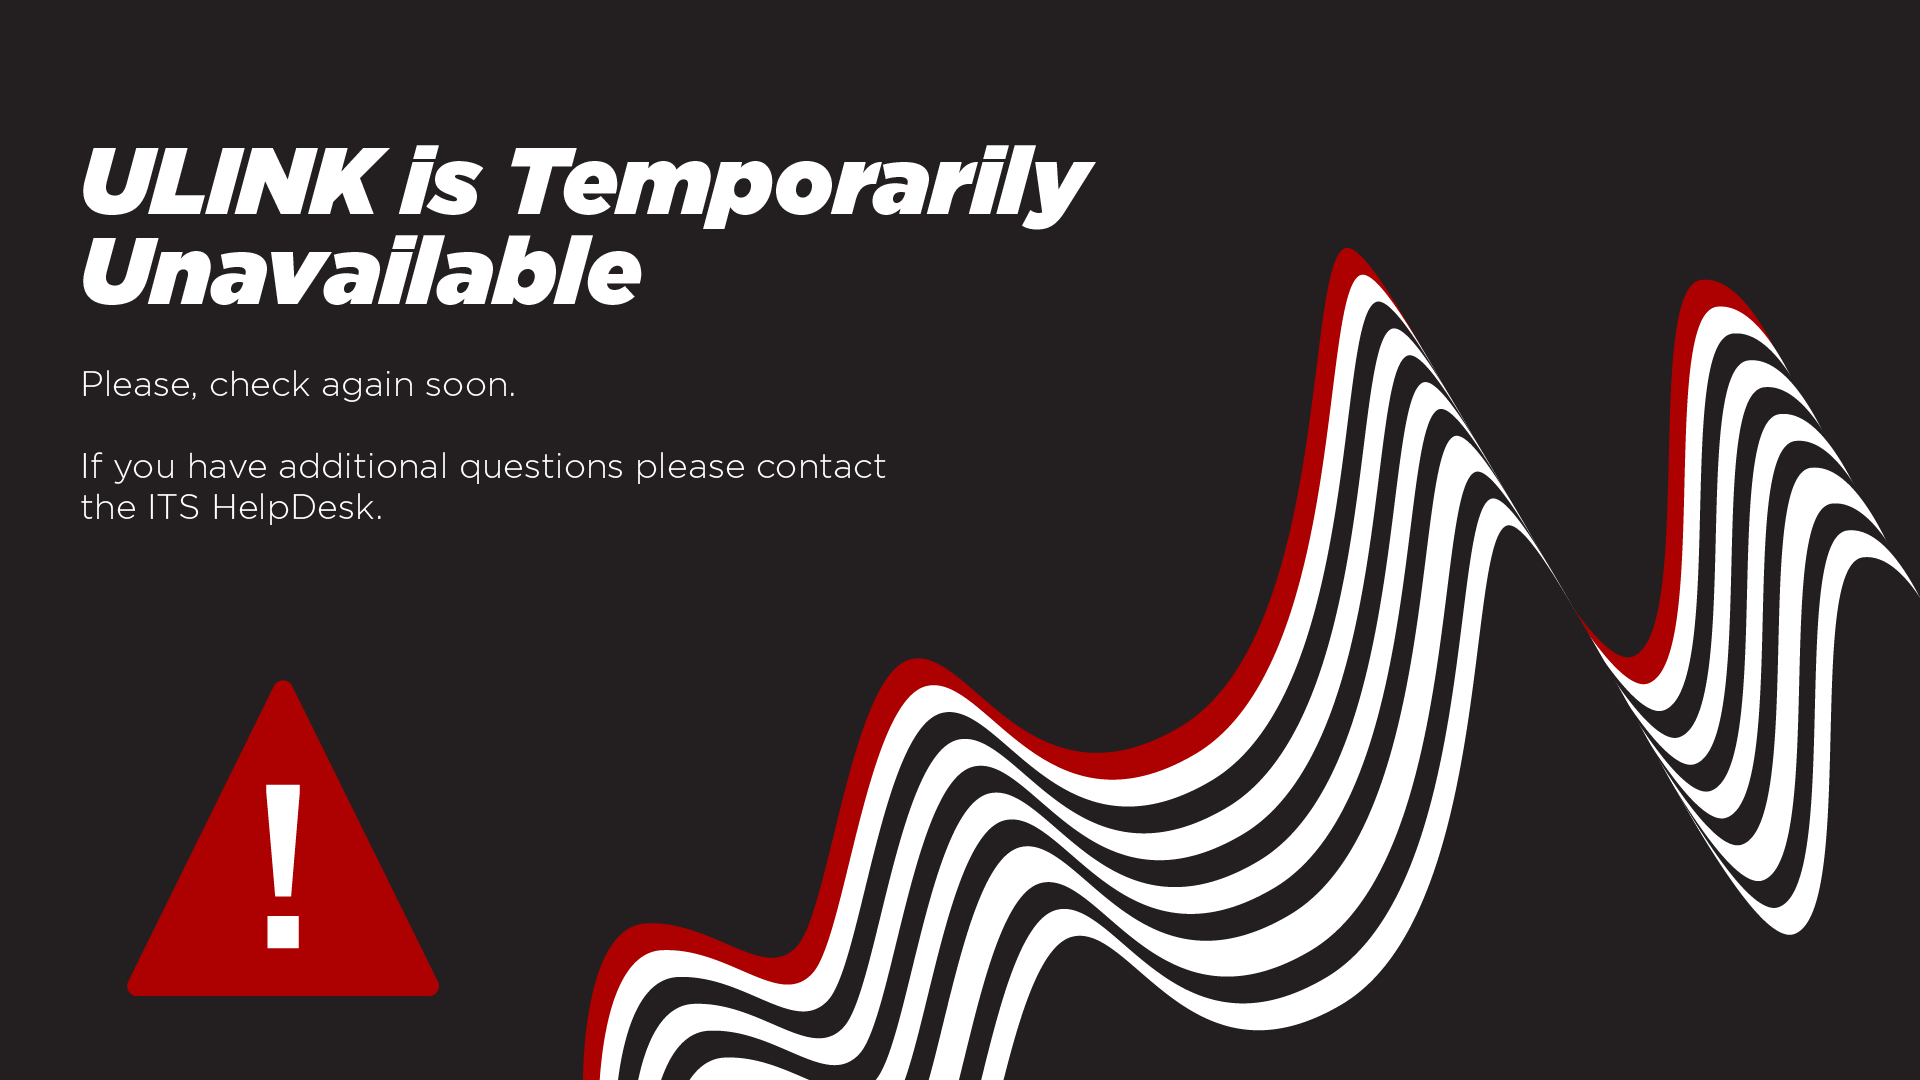 ULINK is Temporarily Unavailable